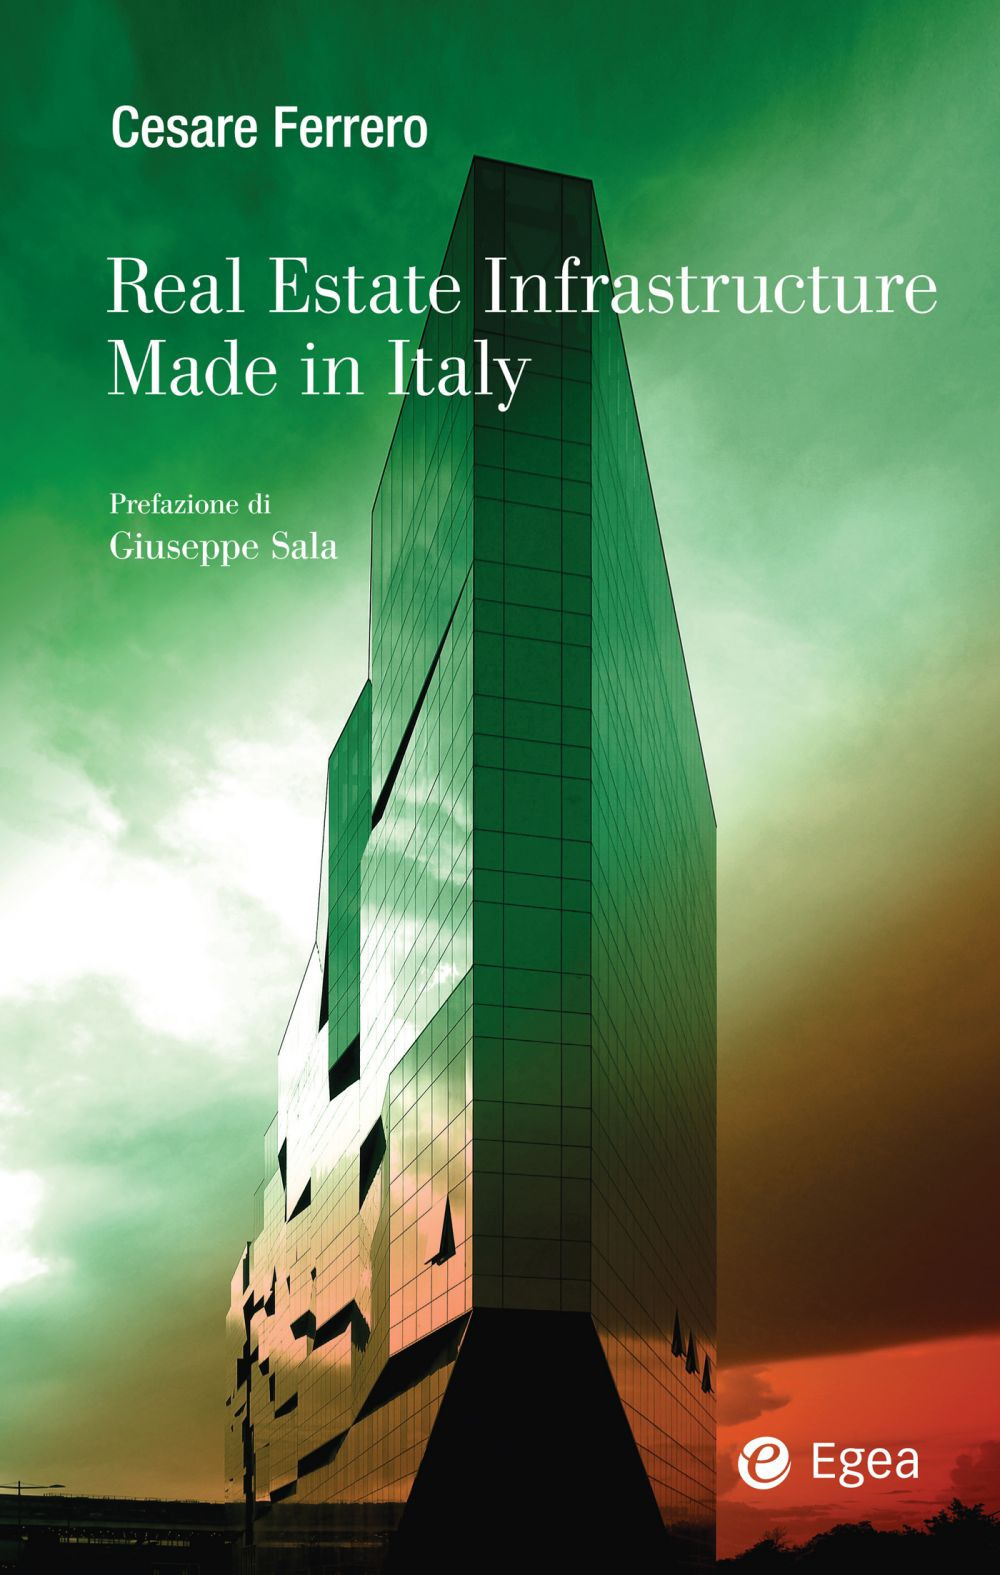 Real estate infrastructure made in Italy